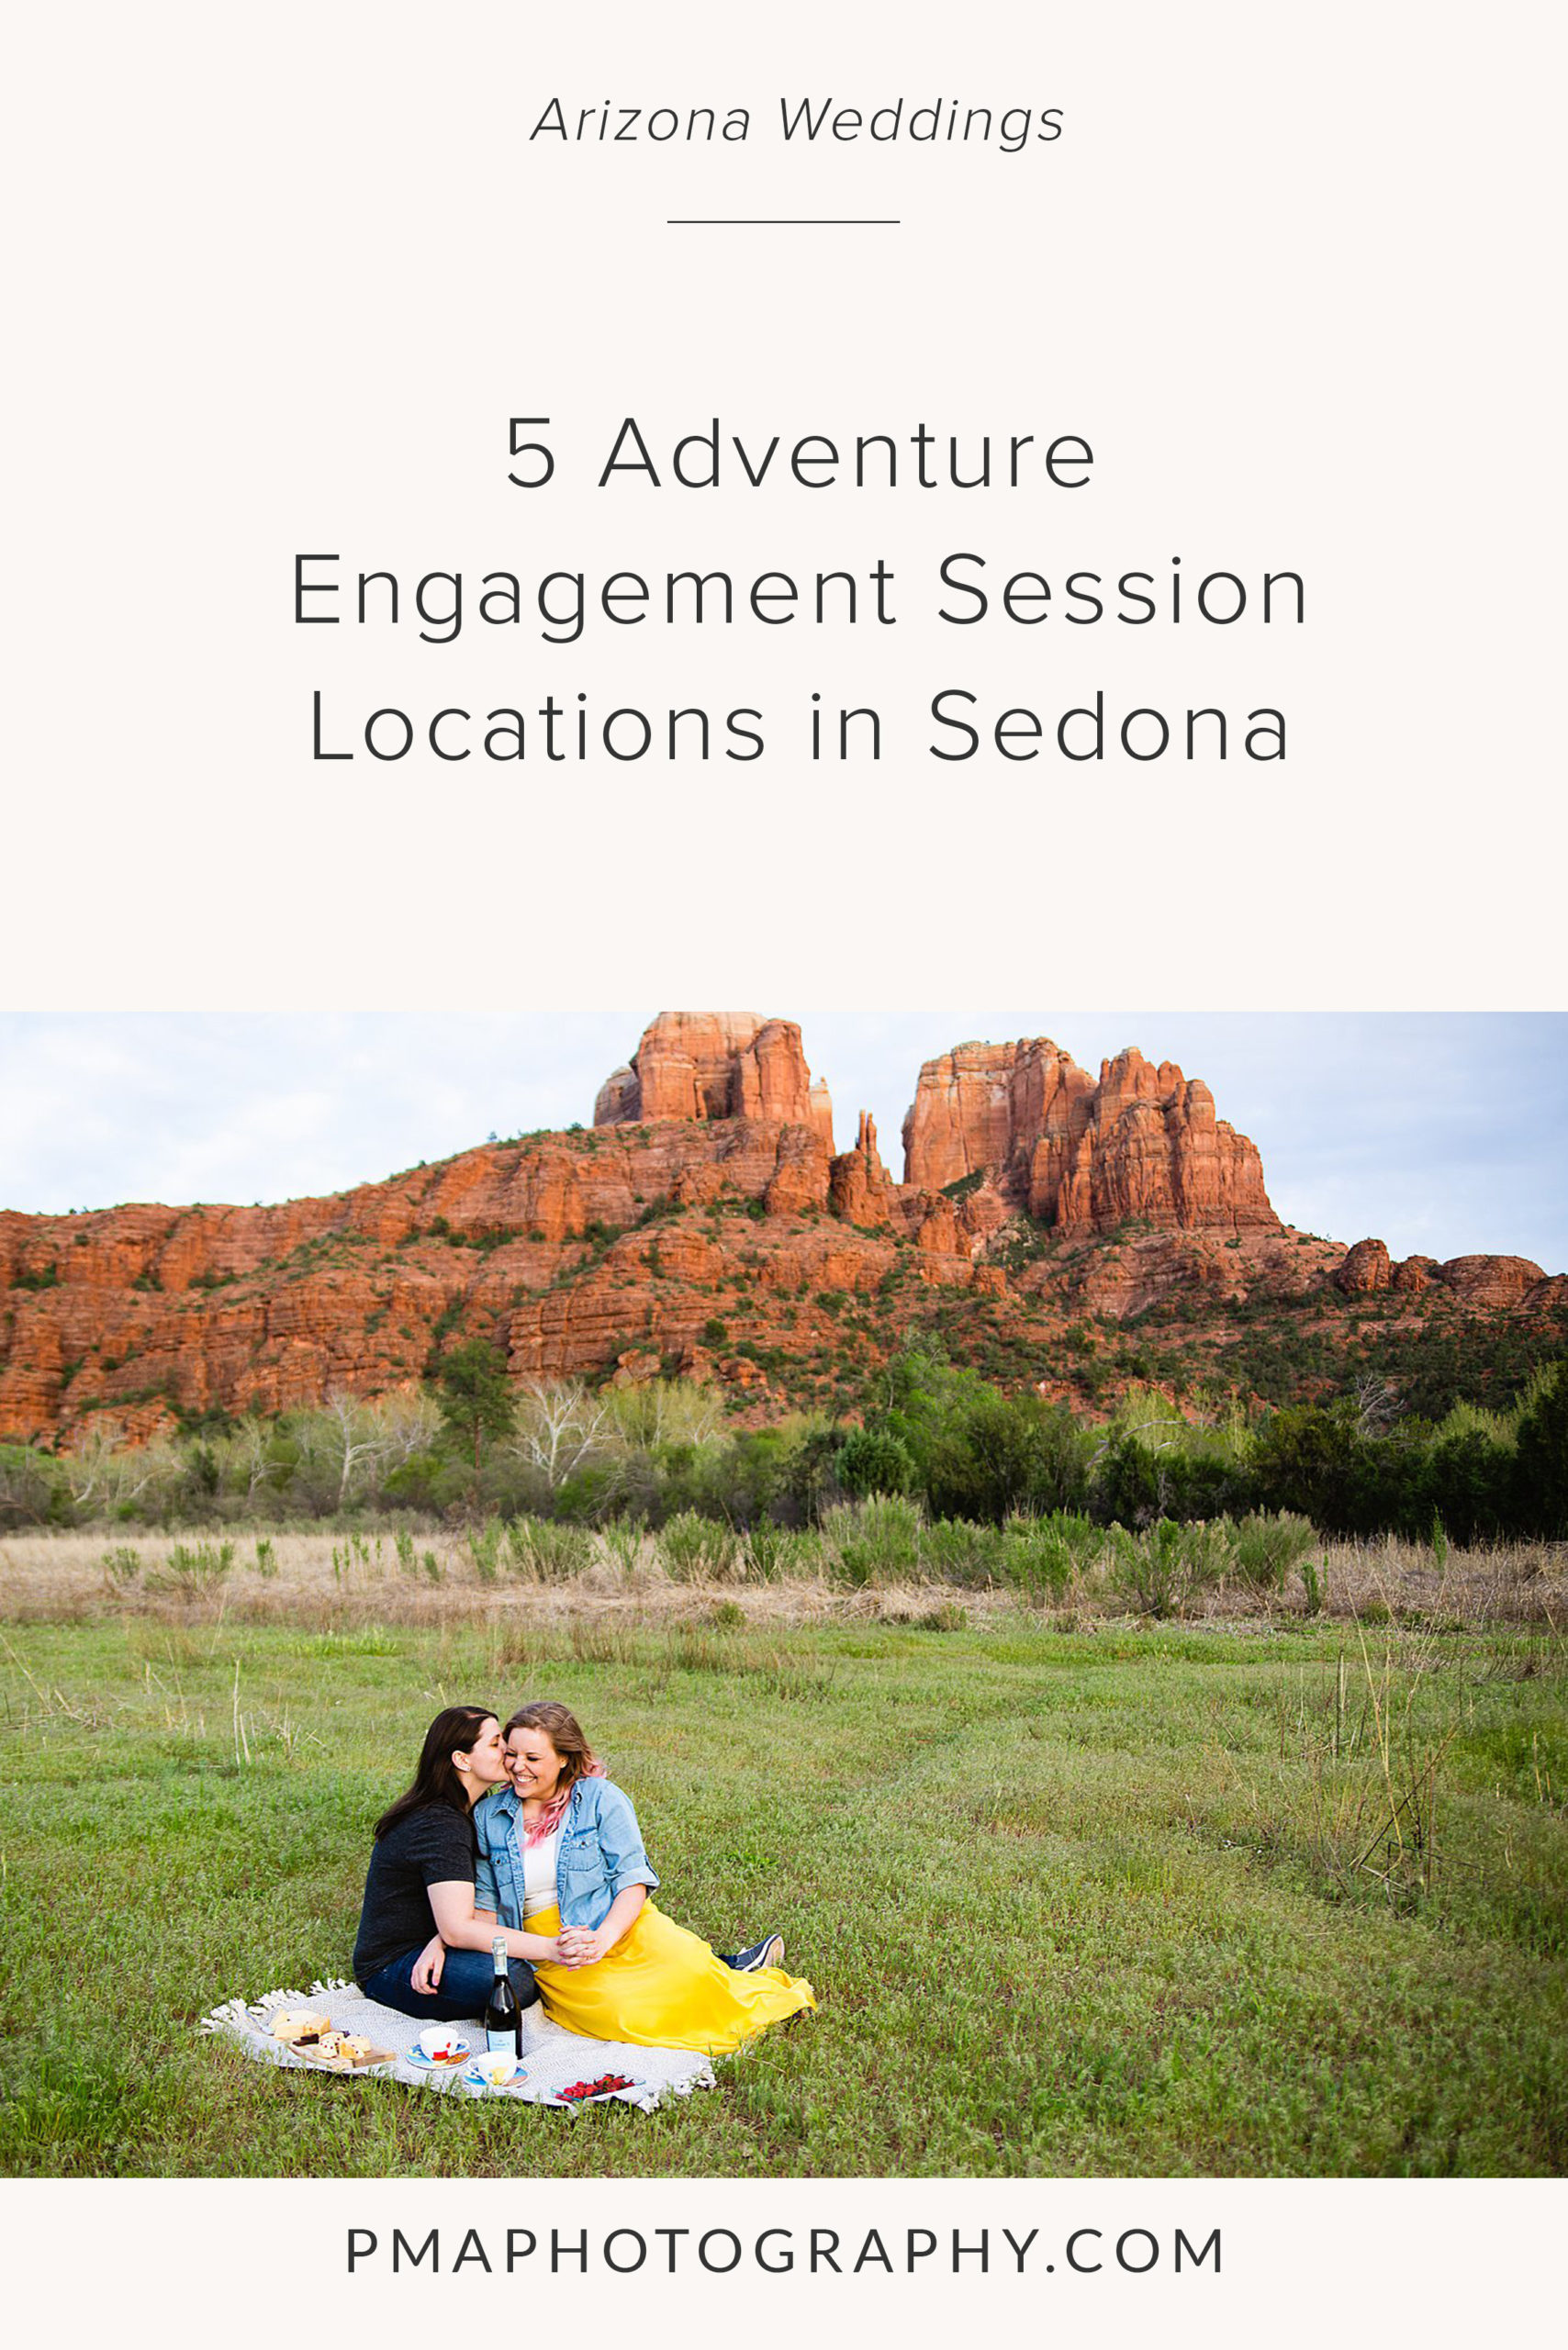 5 Adventure Engagement Session Locations in Sedona by PMA Photography